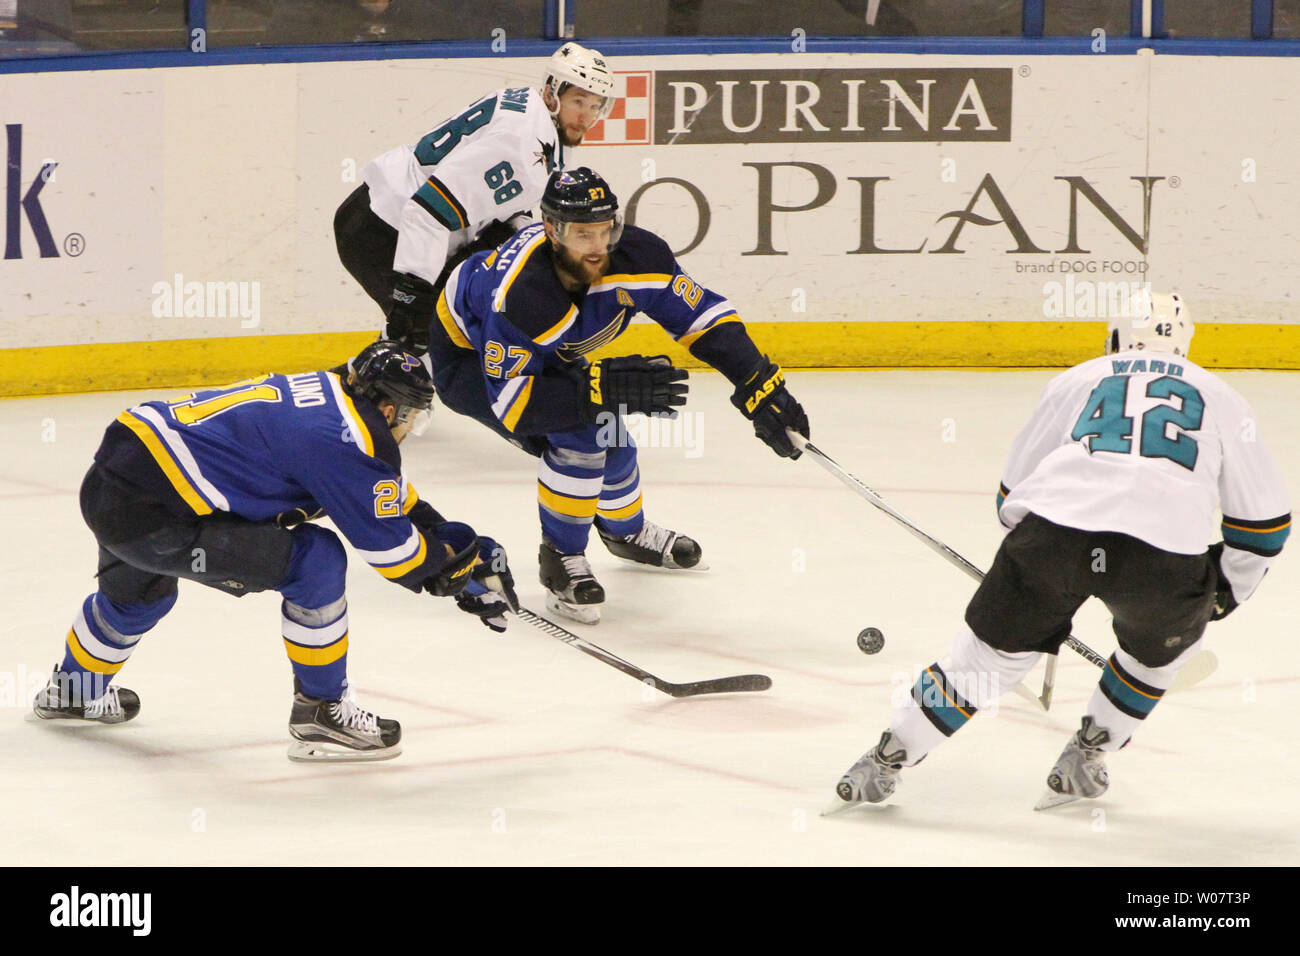 St. Louis Blues Alex Pietrangelo knocks the puck from the stick of San Jose Sharks Joel Ward in the first period at the Scottrade Center in St. Louis on May 23, 2016. UPI/Robert Cornforth Stock Photo